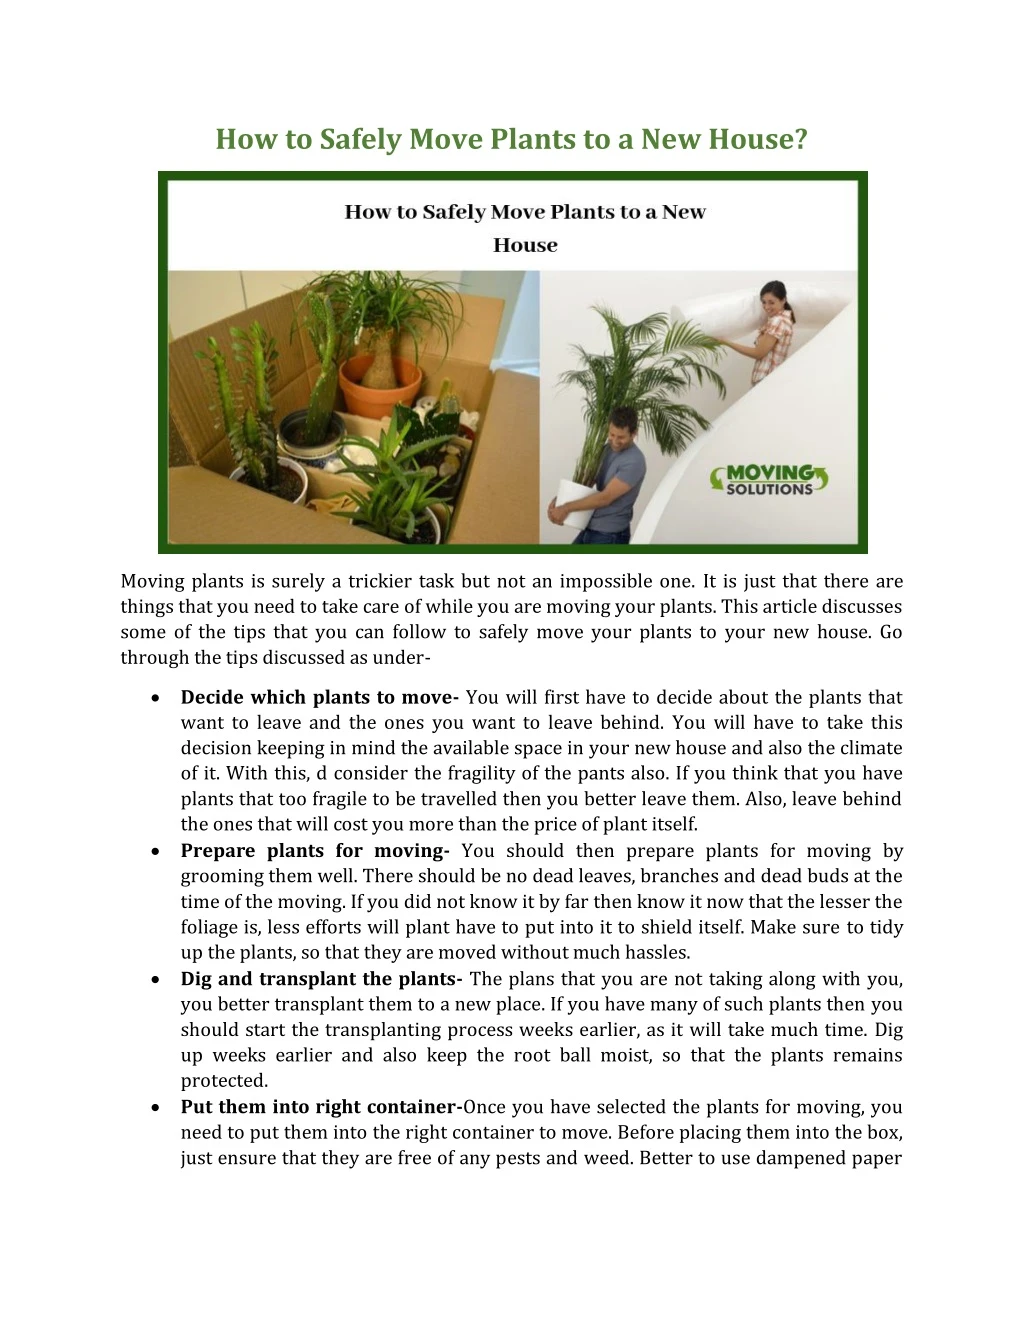 how to safely move plants to a new house